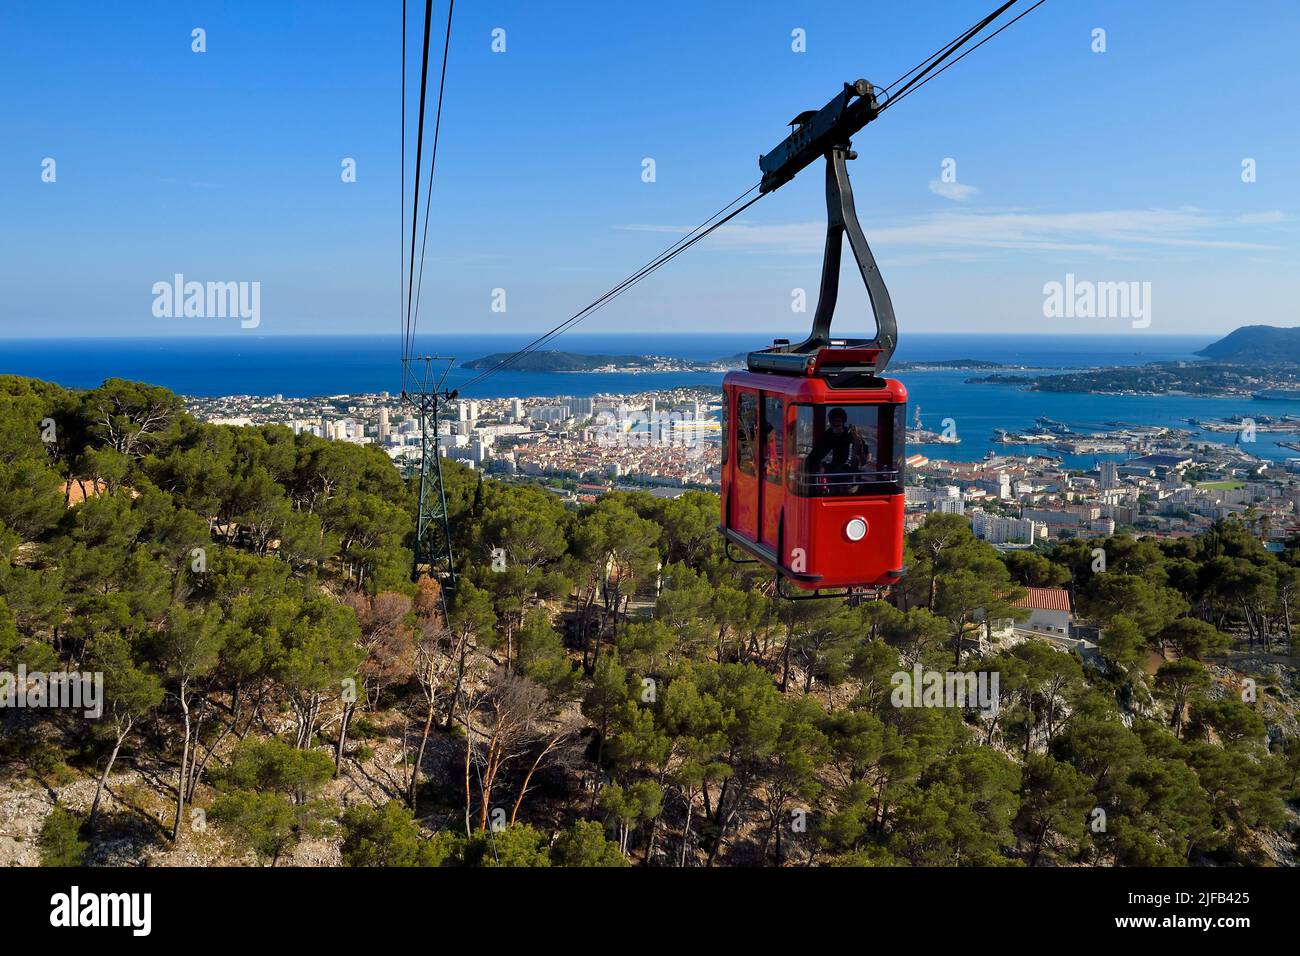 France, Var, Toulon, the cable car from the Mont Faron, the city and the naval base (Arsenal) in the Rade (Roadstead) in the background Stock Photo